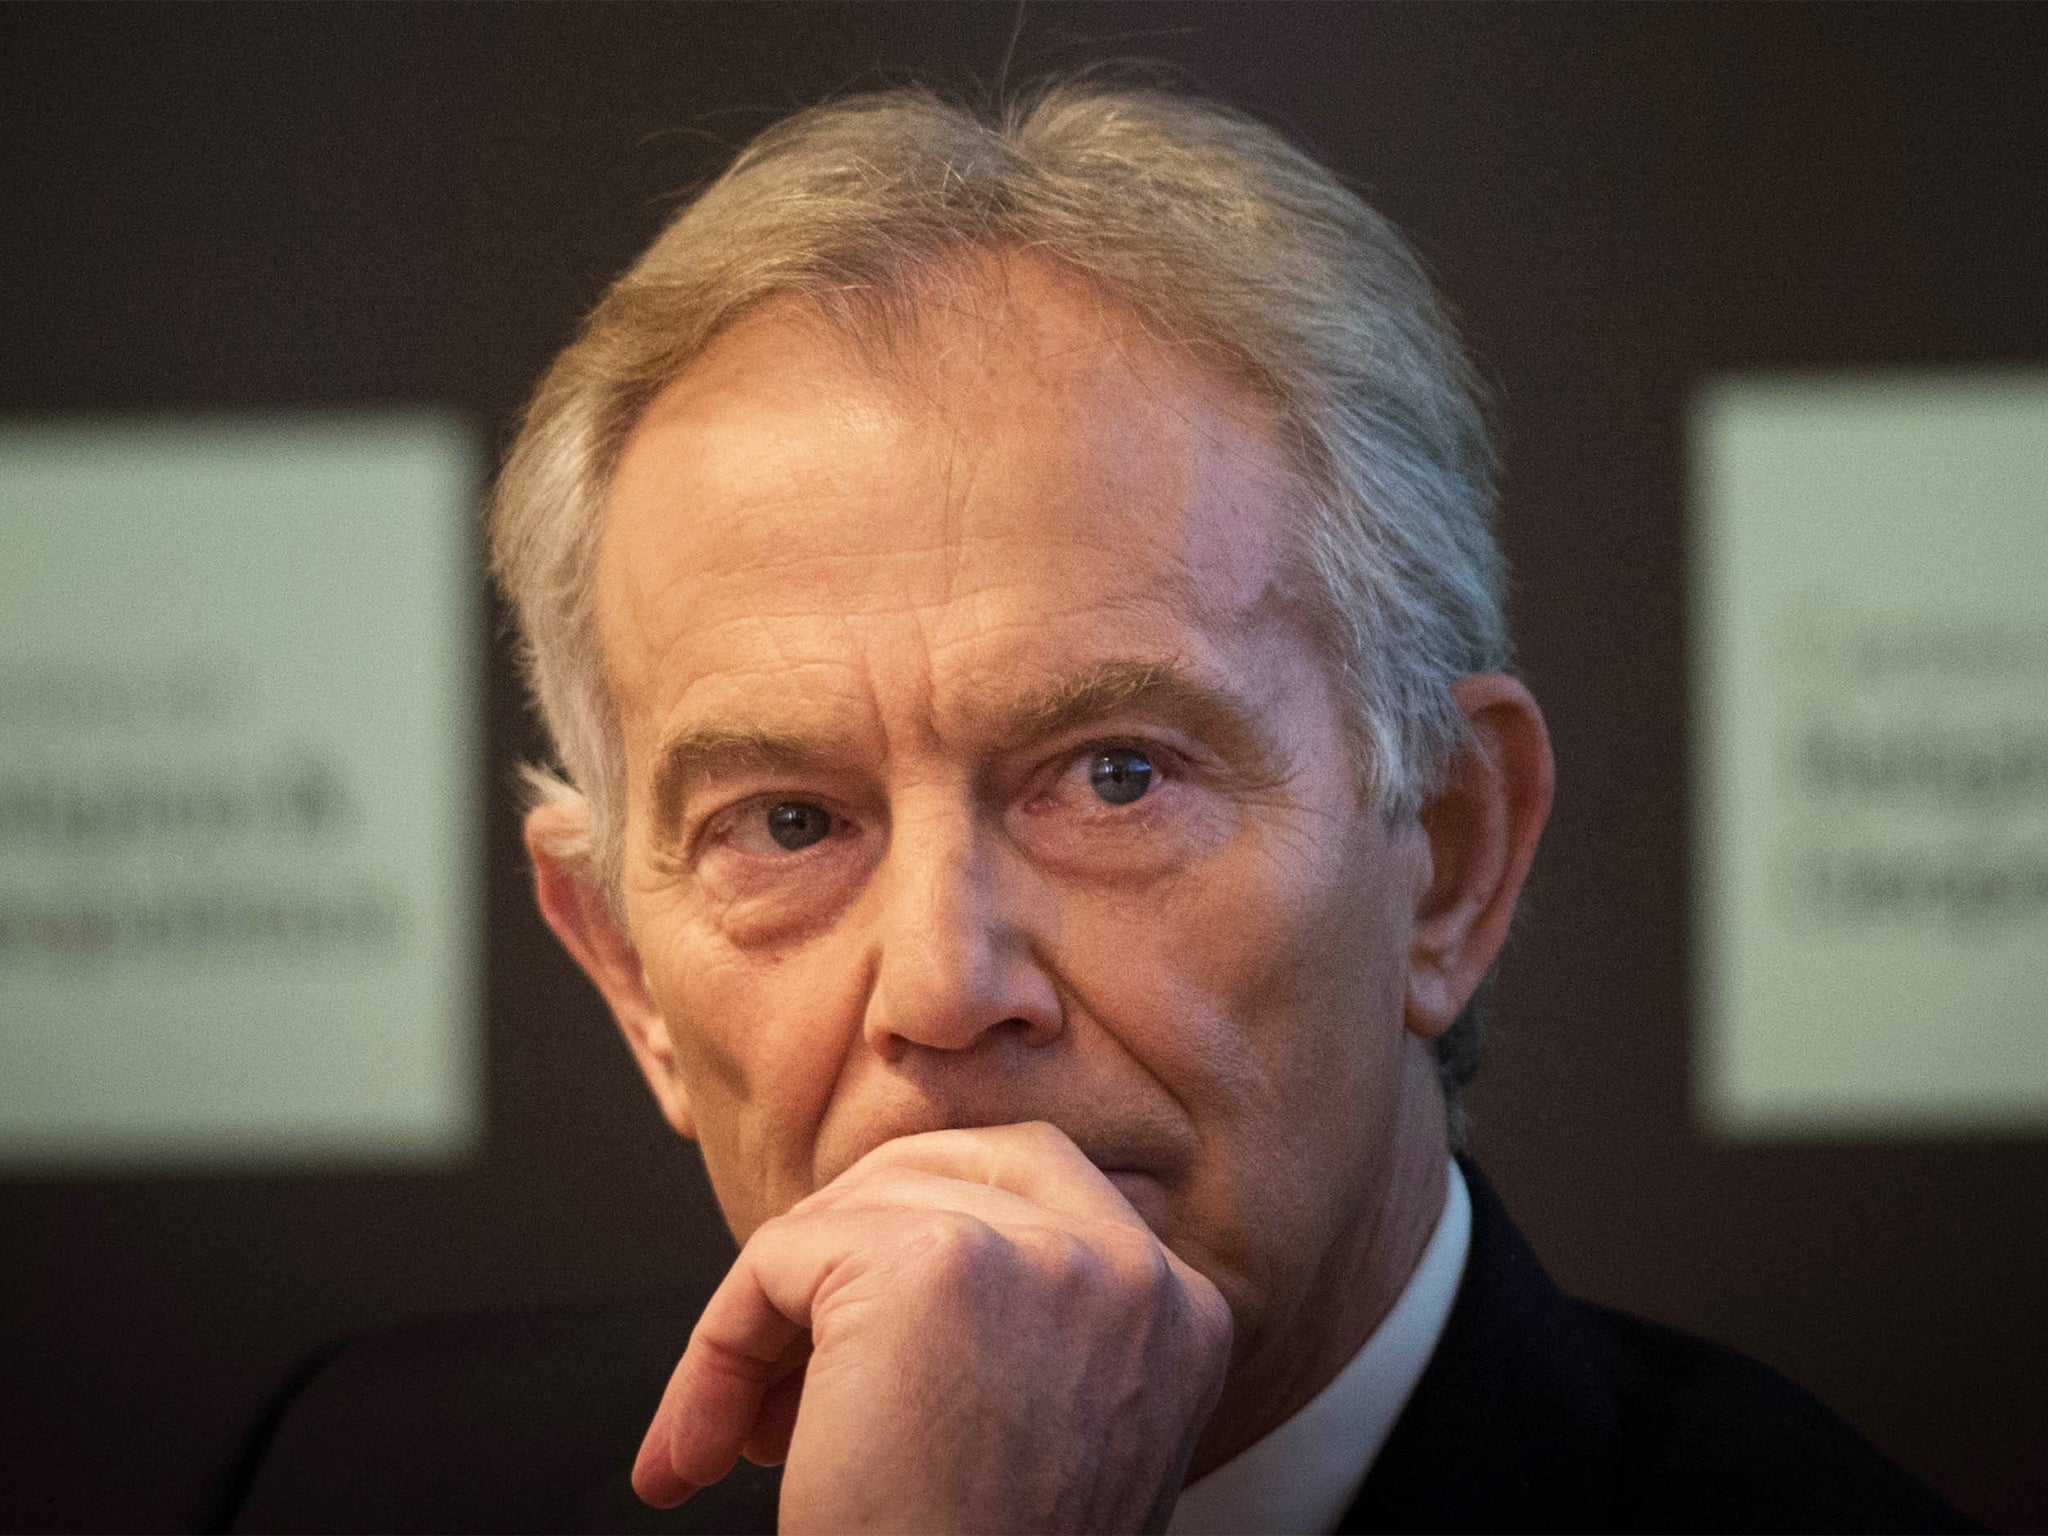 53 per cent of the general public said they could “never forgive” Tony Blair